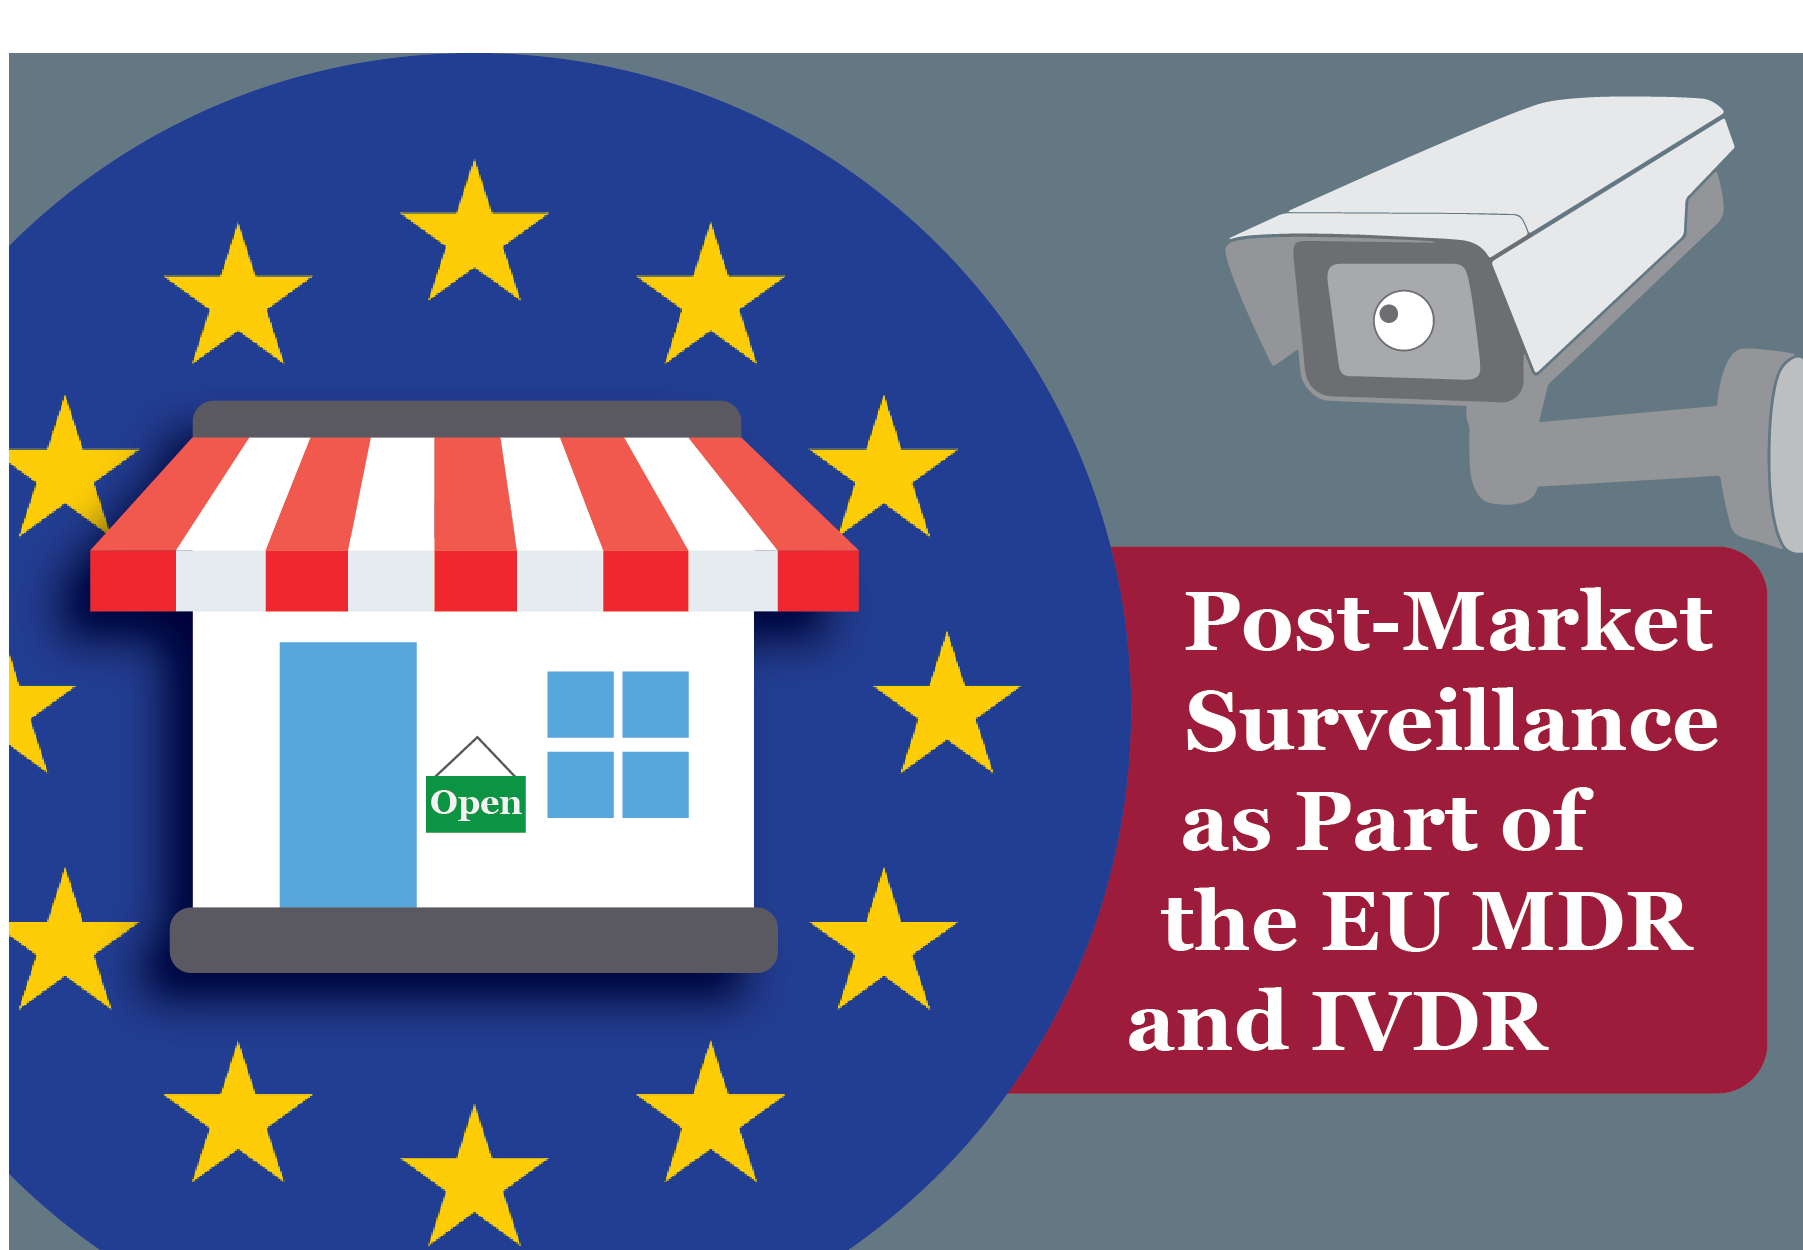 Post-Market Surveillance as part of the EU MDR and IVDR